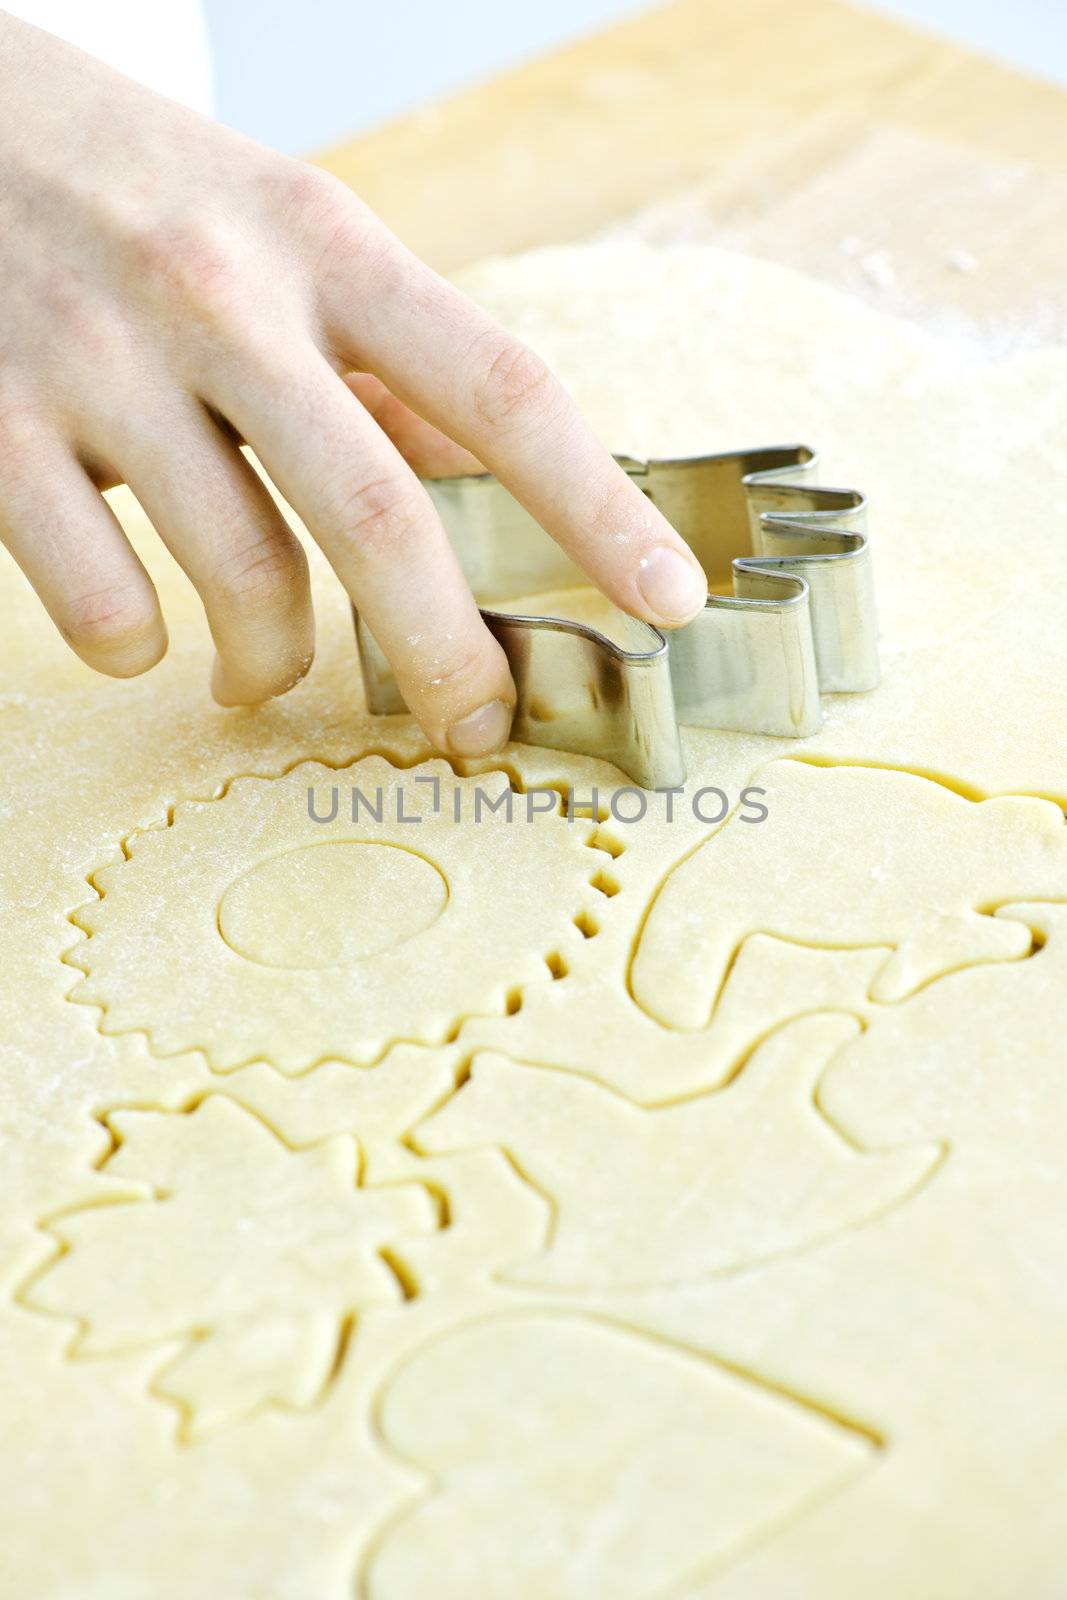 Cookie cutter and dough by elenathewise